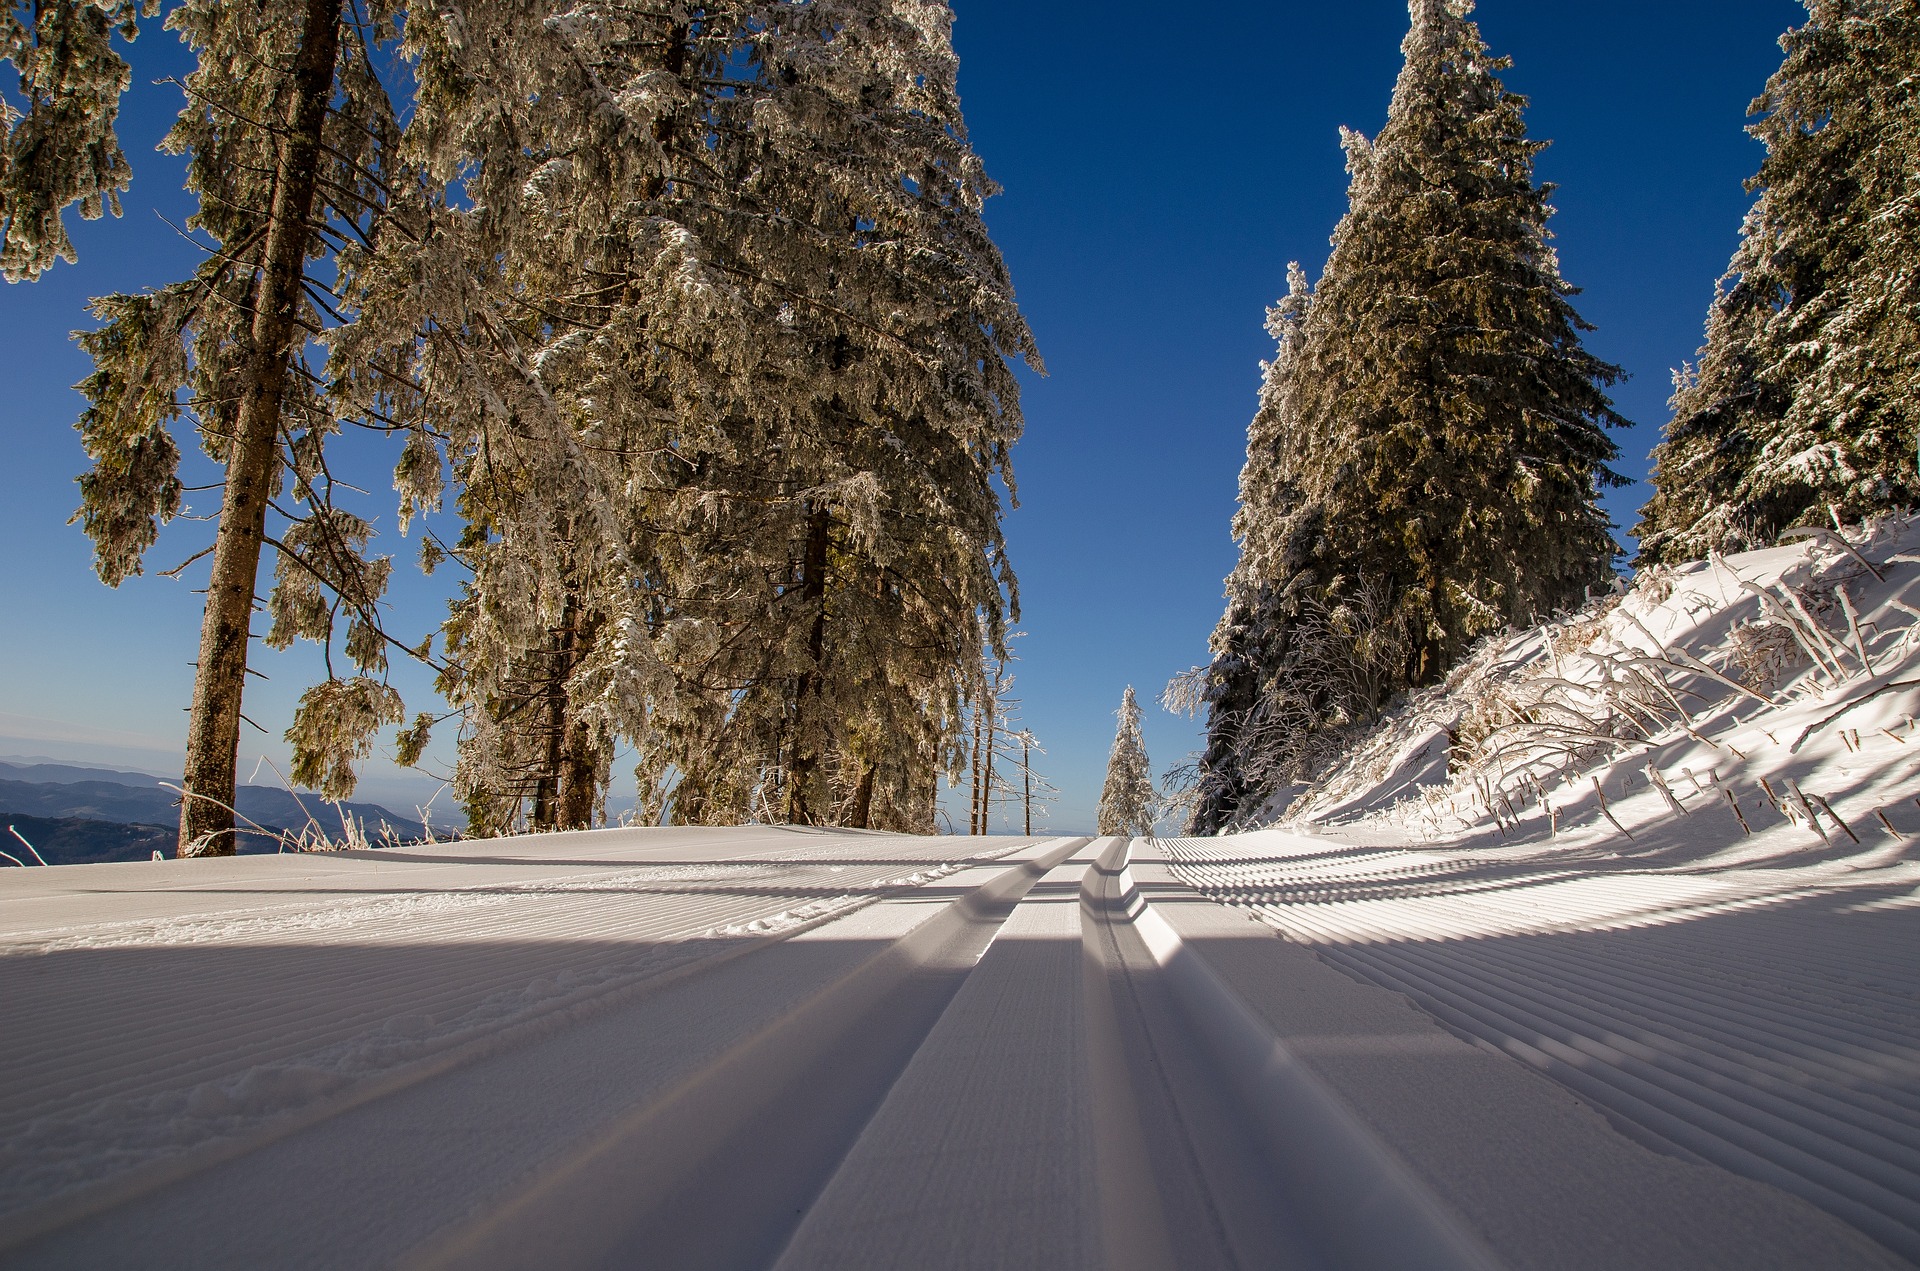 In addition to plenty of downhill trails, Sunrise also has plenty of places to go cross country skiing.